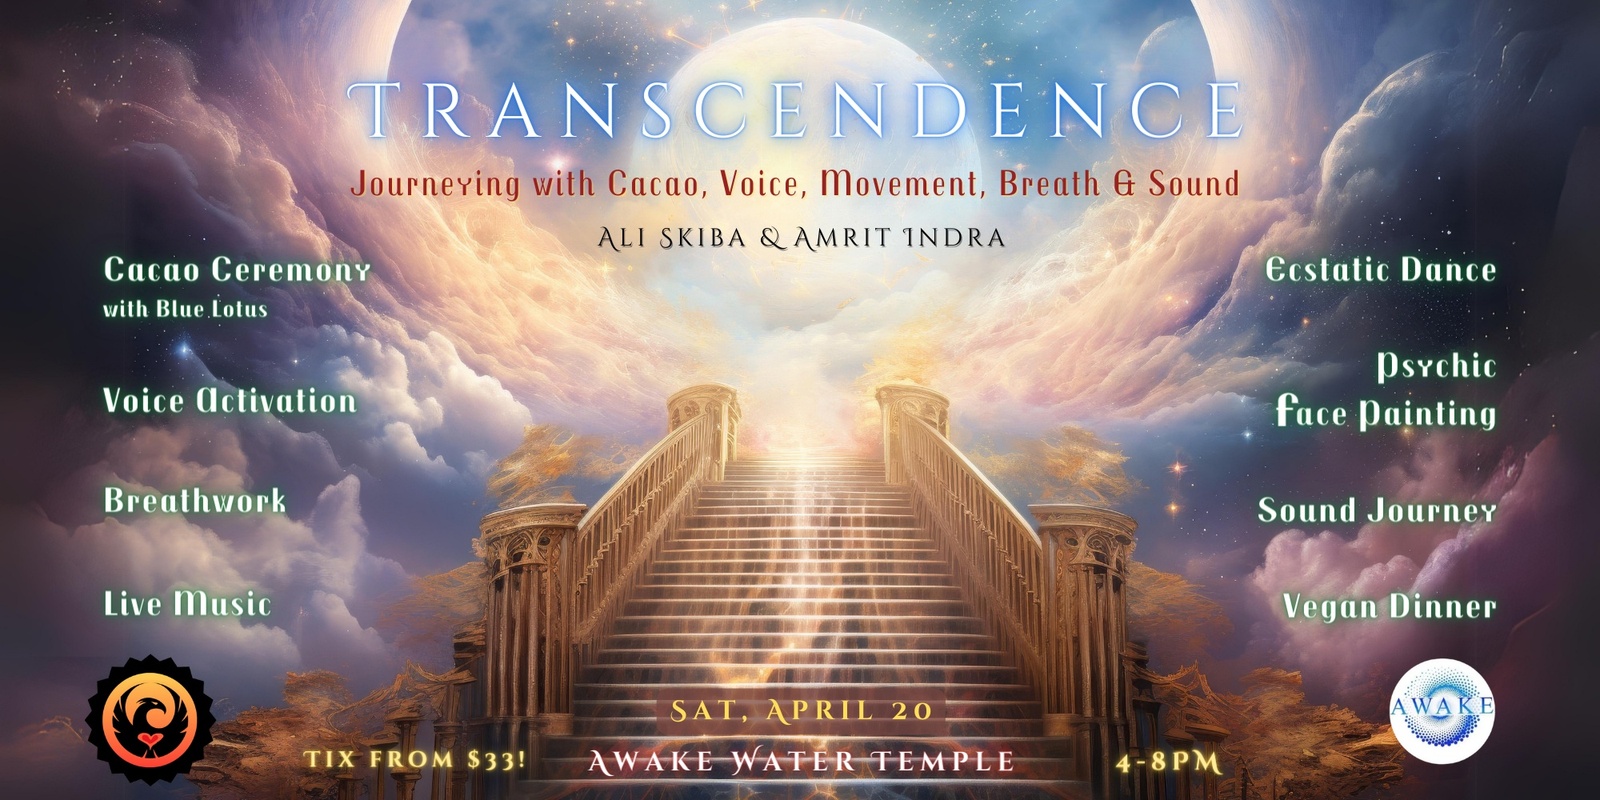 Banner image for Transcendence ~ Journeying with Cacao, Voice, Movement, Breath & Sound